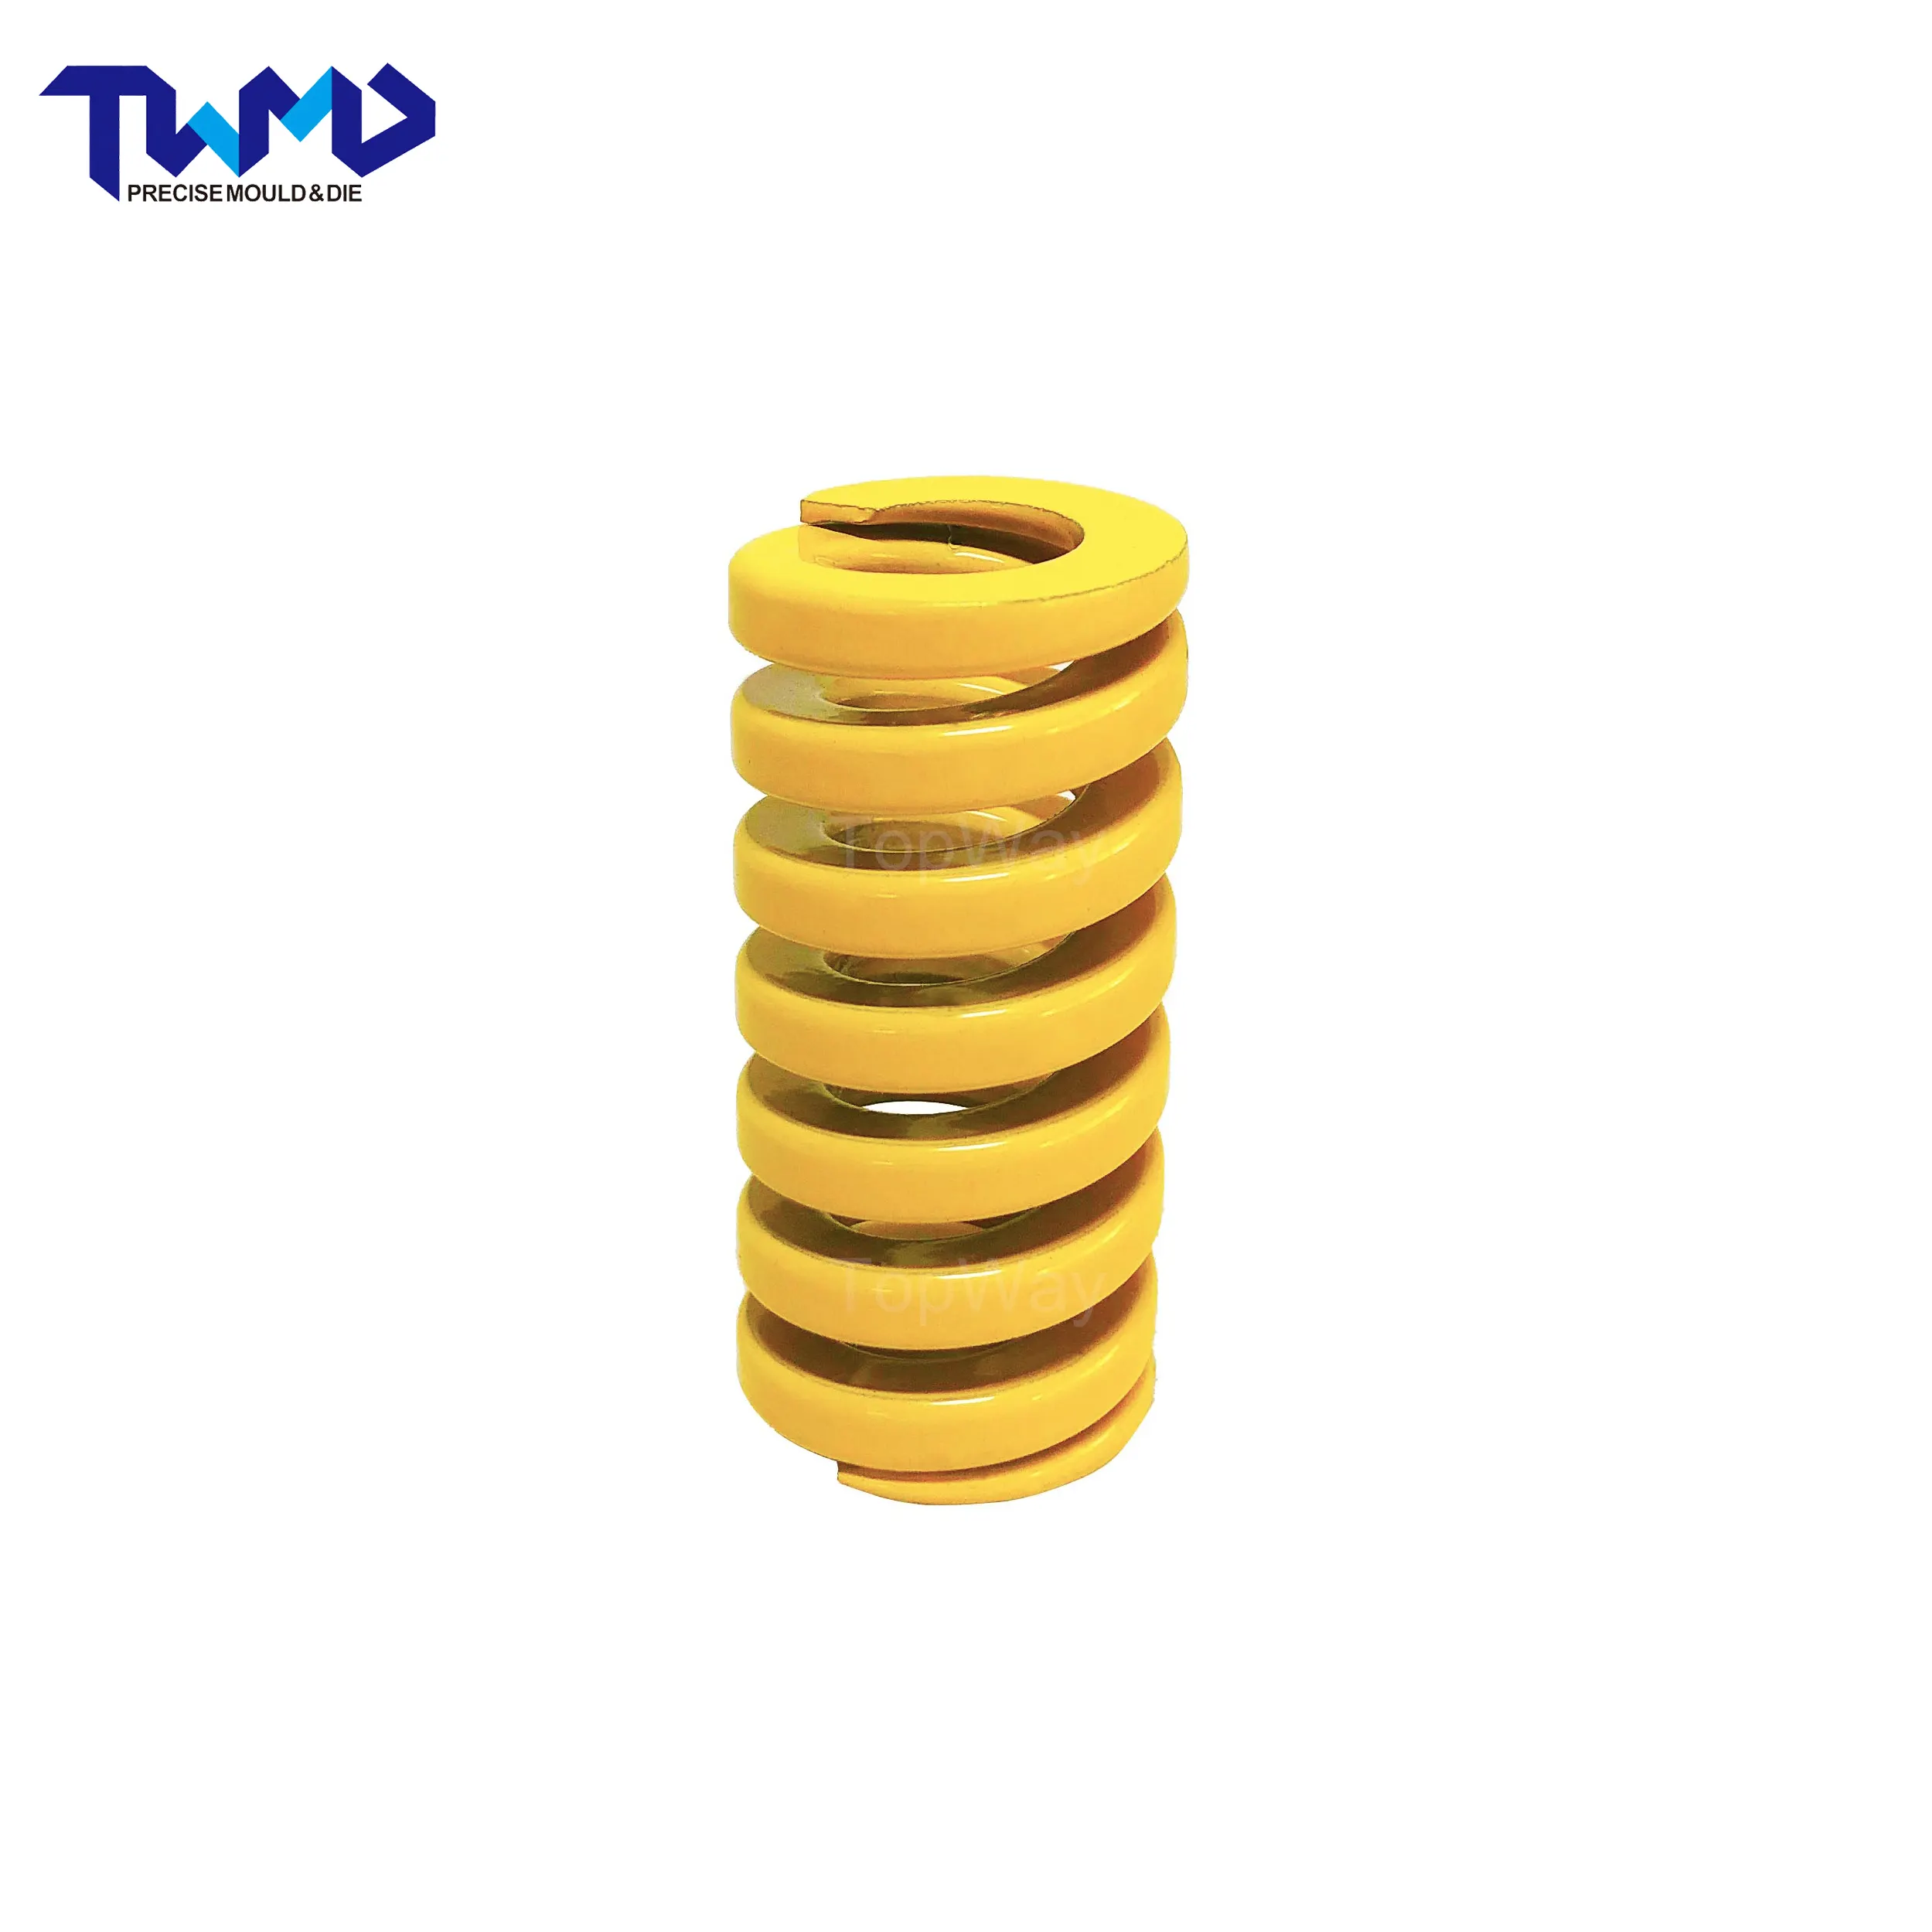 ISO 10243 rectangular compression extra heavy load die mould spring